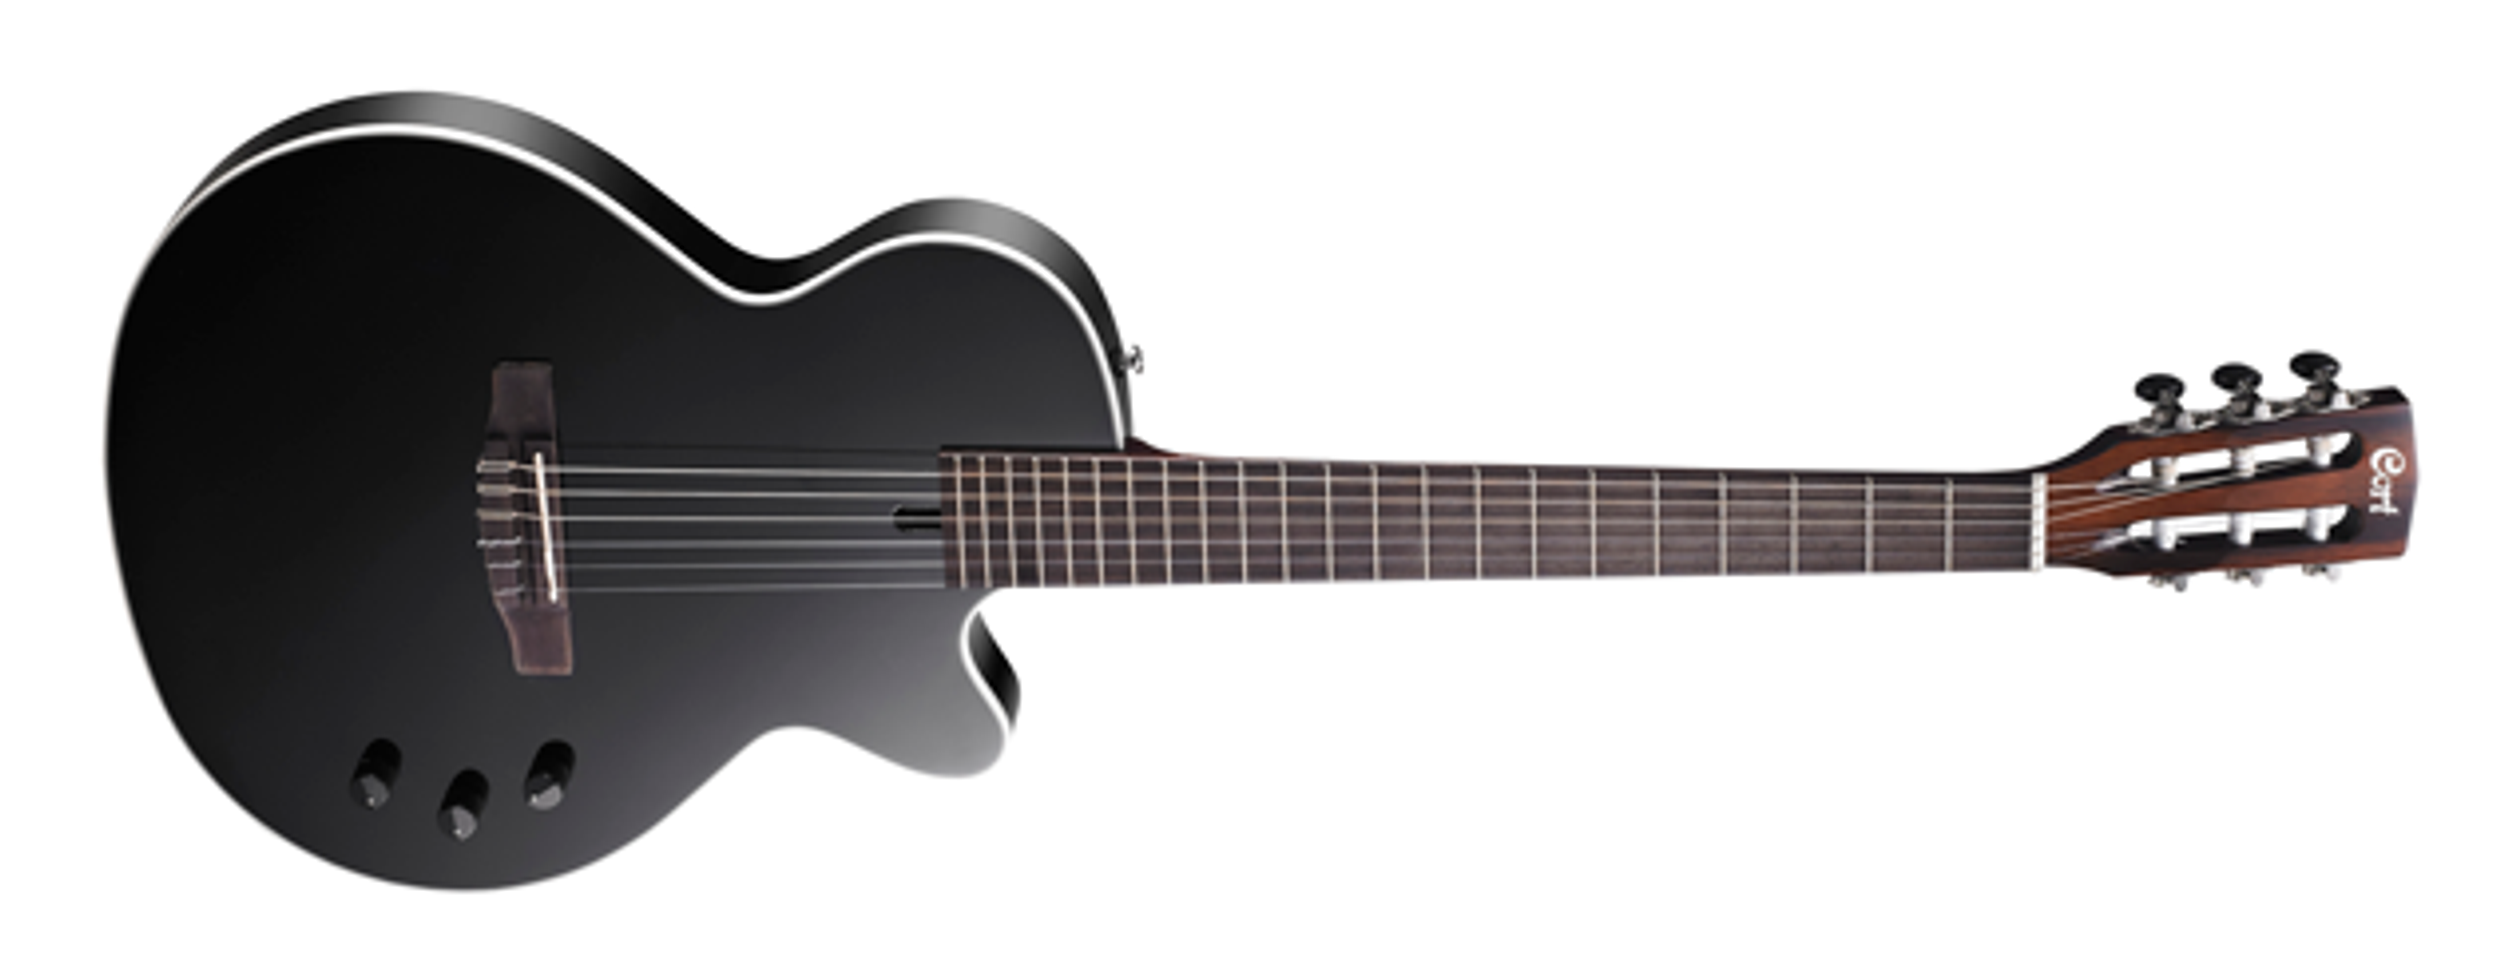 Cort Guitars Unveils the Sunset Nylectric